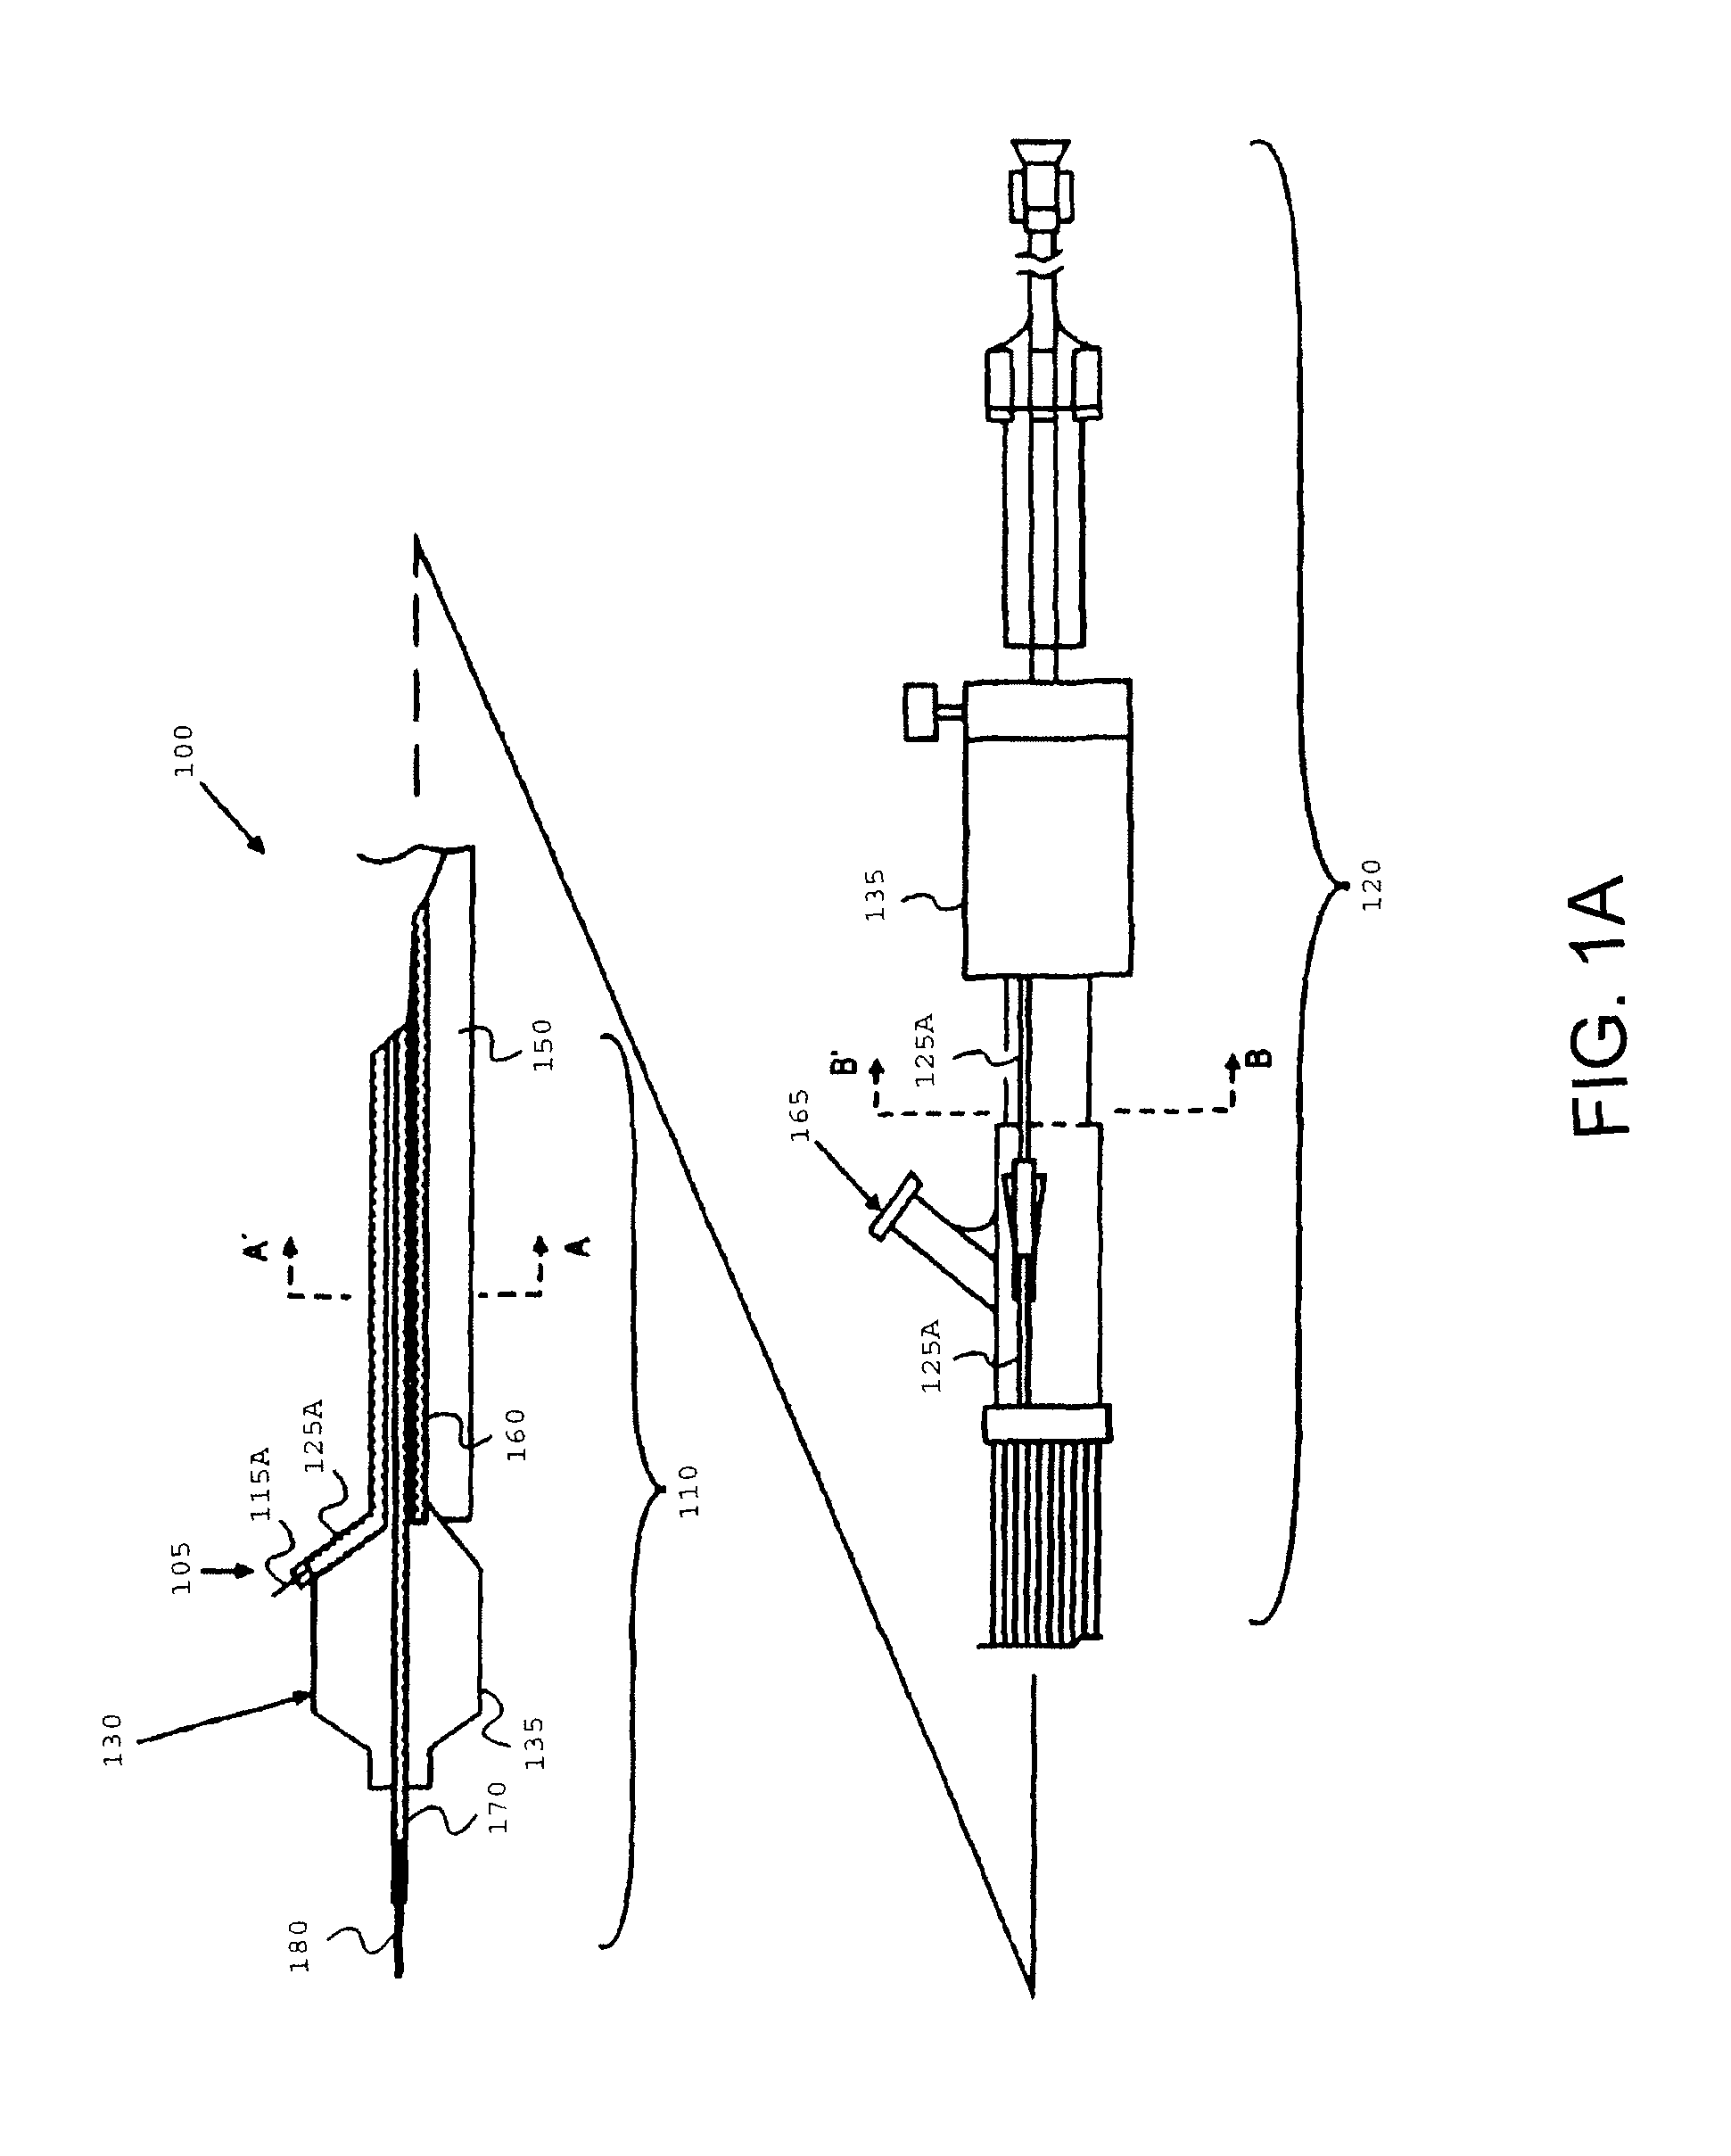 Multiple growth factor compositions, methods of fabrication, and methods of treatment